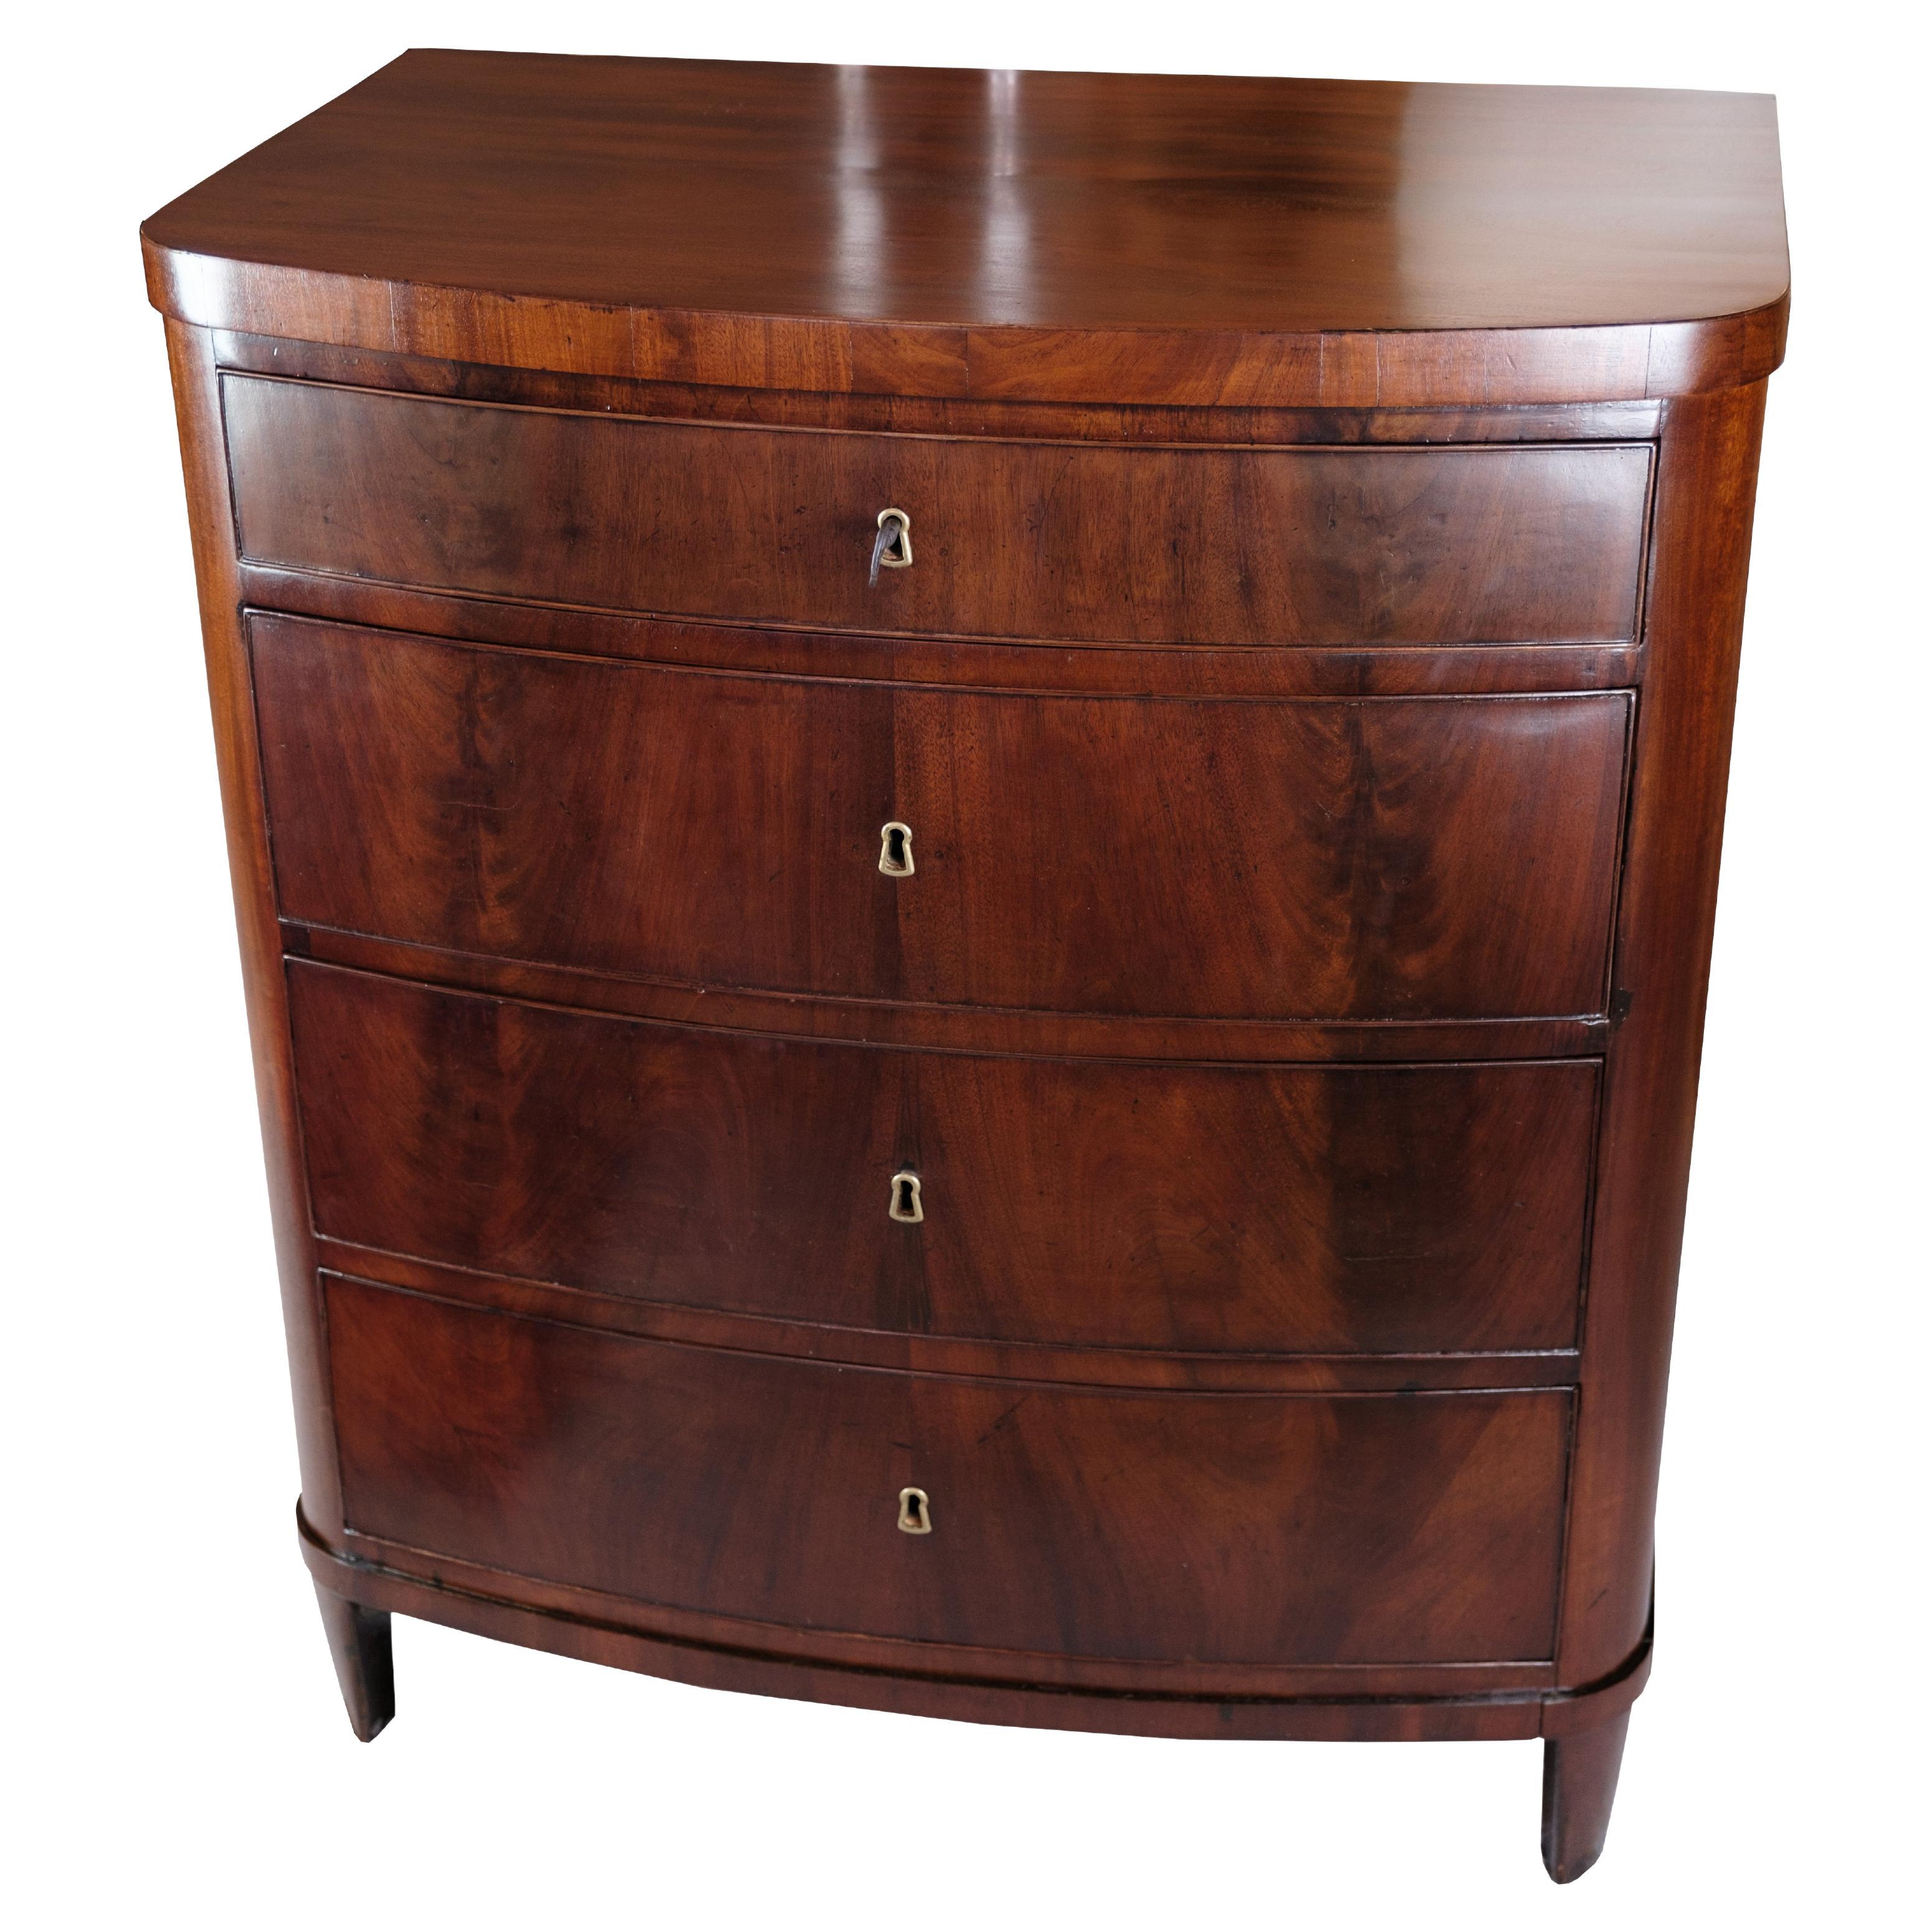 Empire Chest of Drawers in Mahogany Curved Front From 1820's